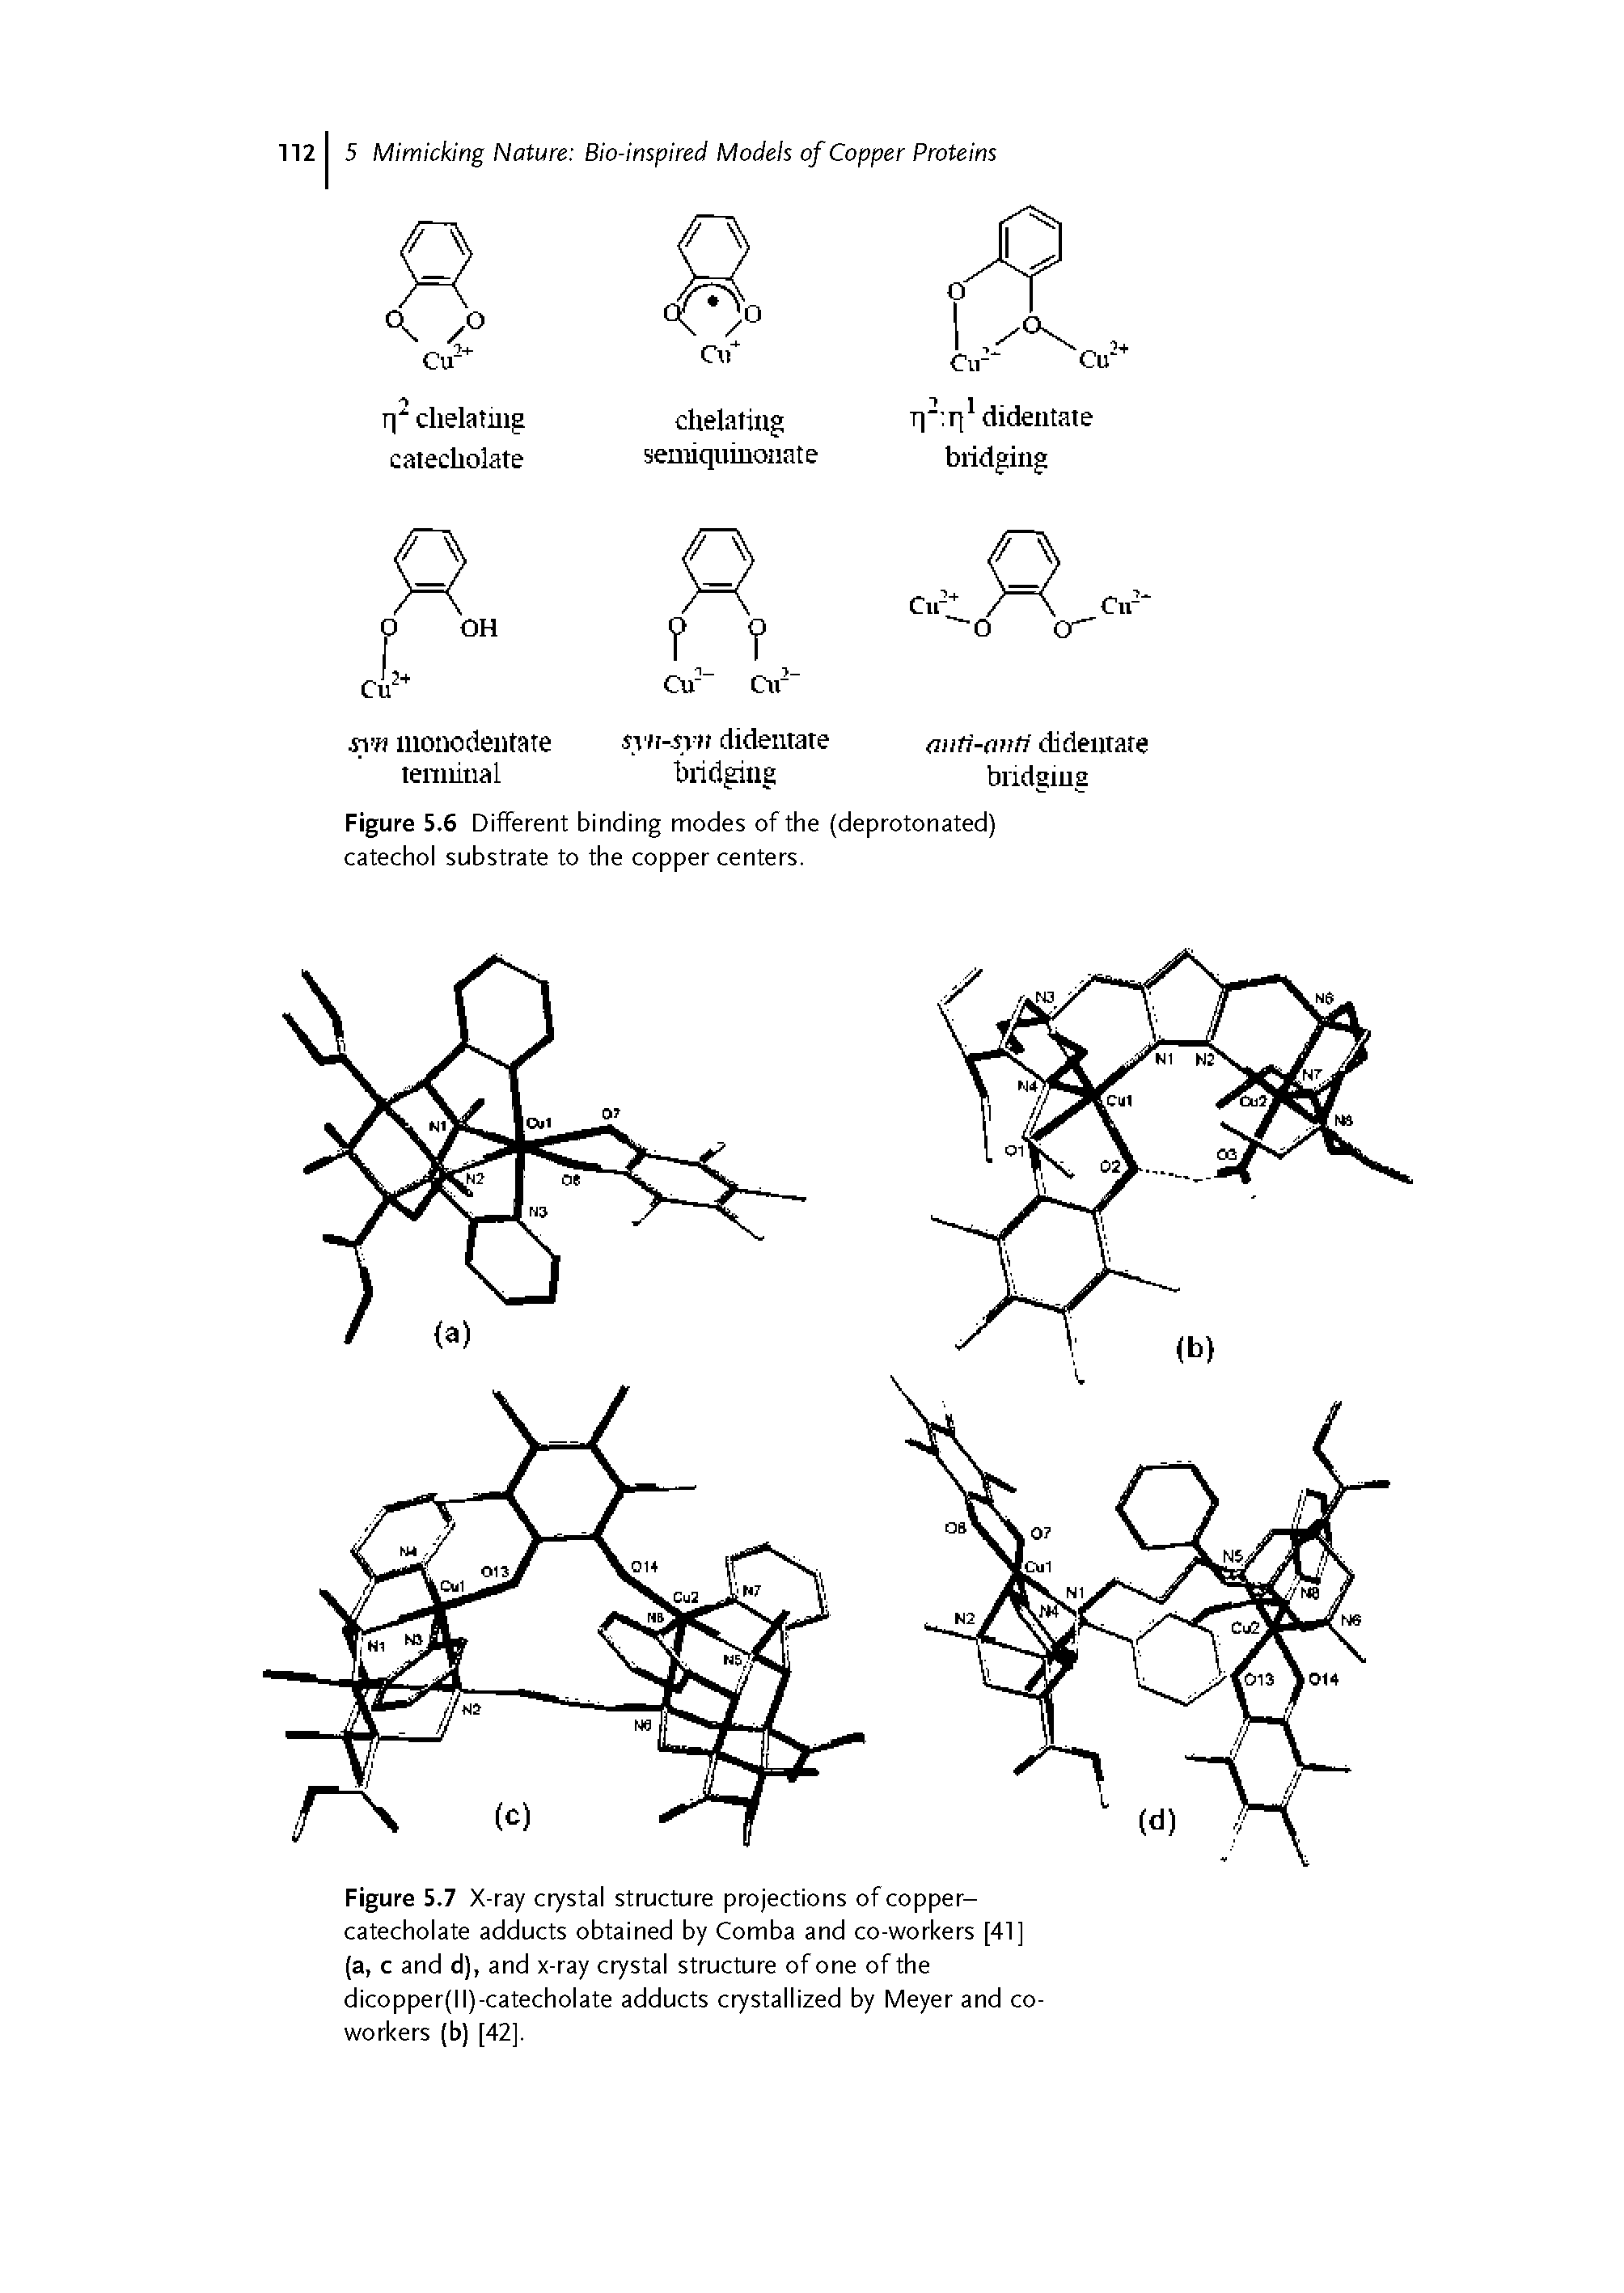 Figure 5.7 X-ray crystal structure projections of copper-catecholate adducts obtained by Comba and co-workers [41] (a, c and d), and x-ray crystal structure of one of the dicopper(ll)-catecholate adducts crystallized by Meyer and coworkers (b) [42],...